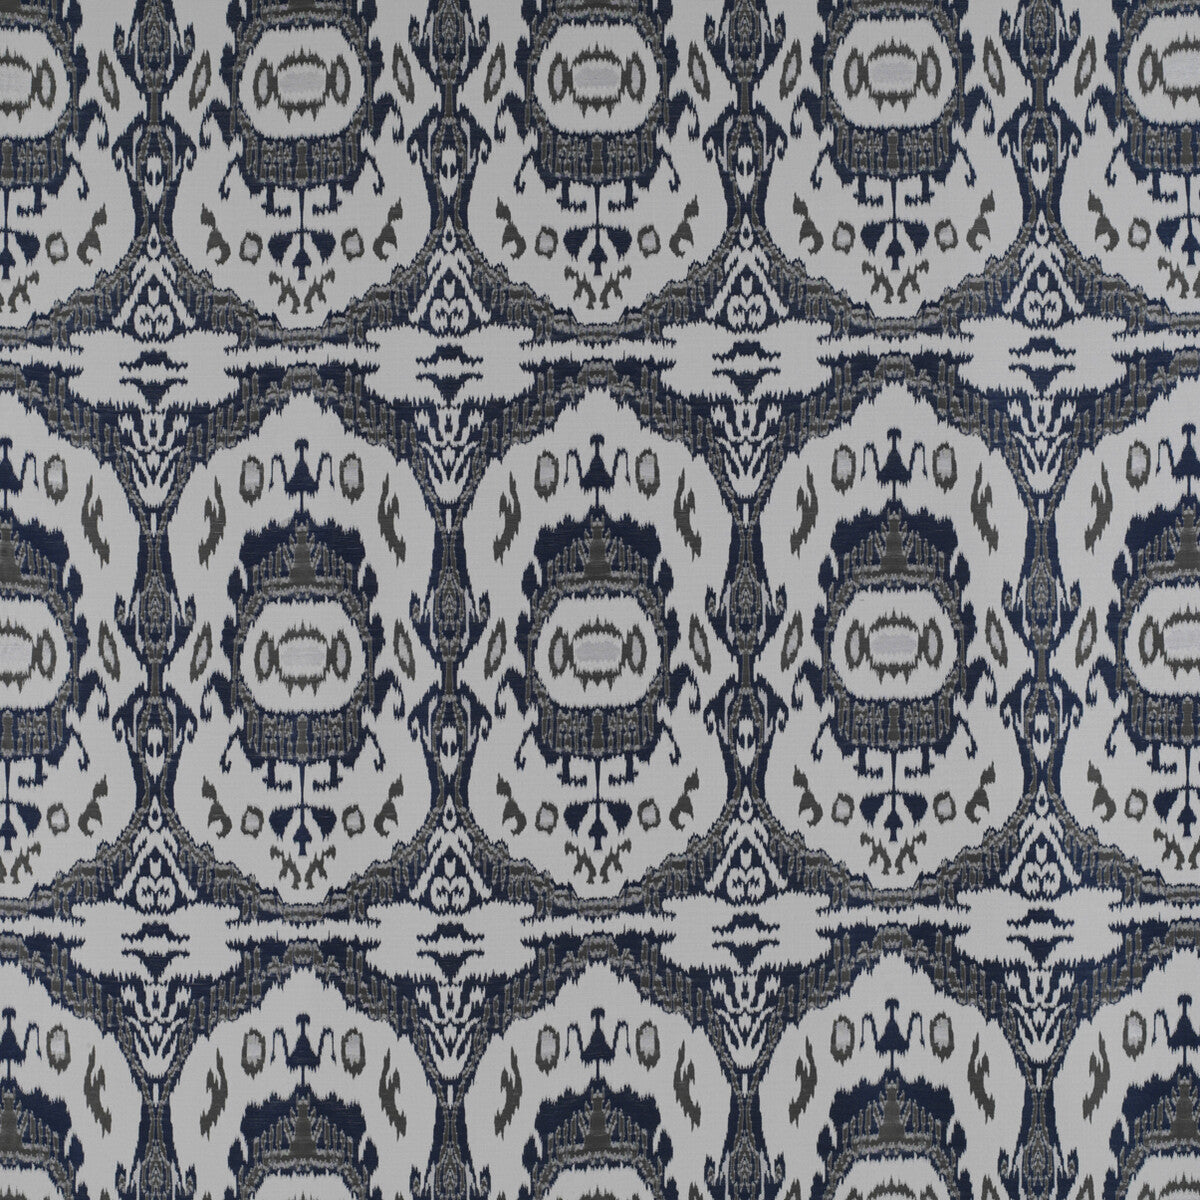 Goya fabric in azul/gris color - pattern GDT5197.004.0 - by Gaston y Daniela in the Madrid collection